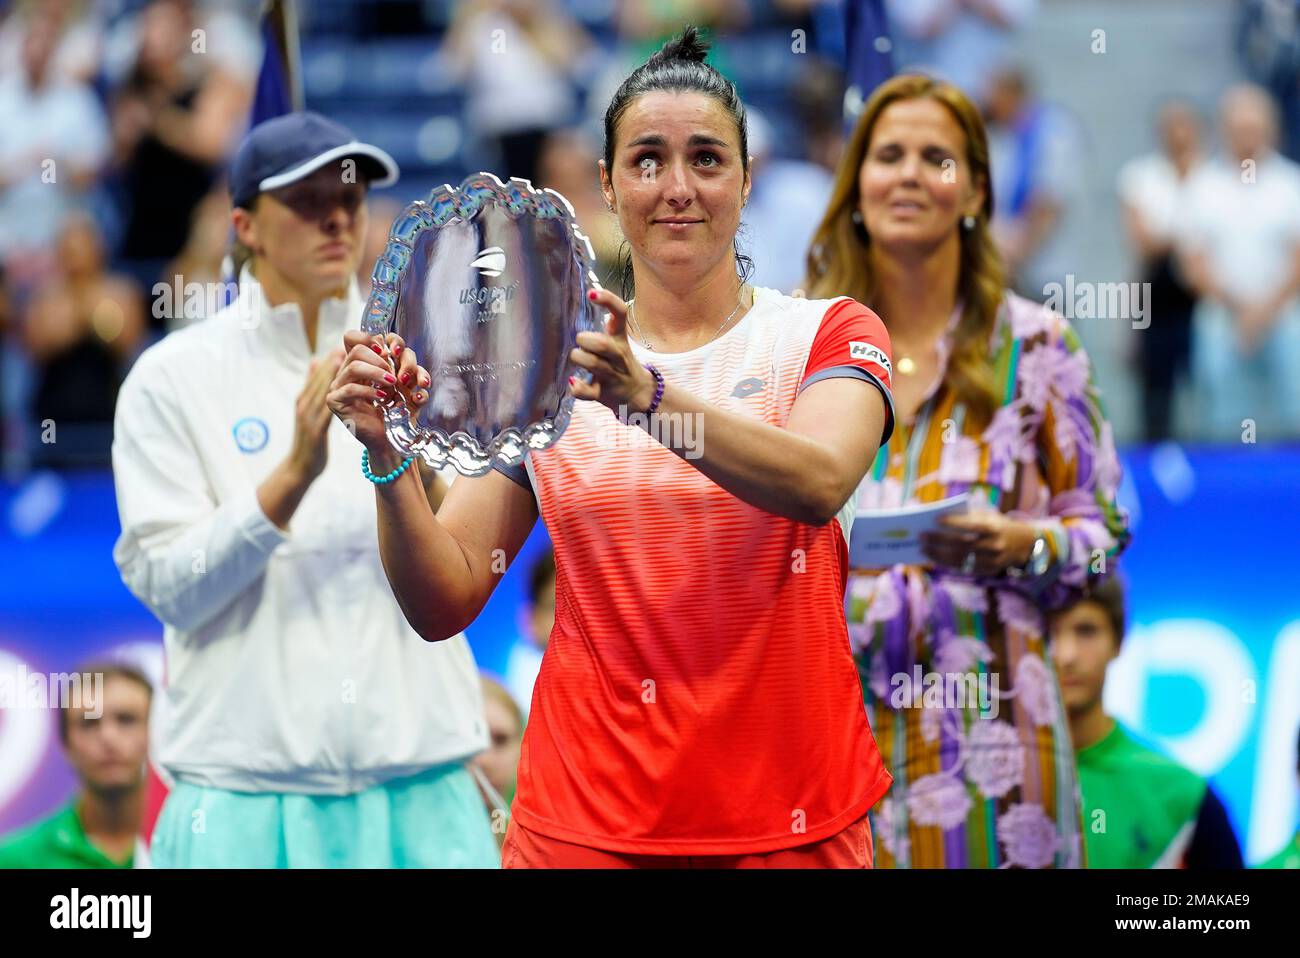 Ons Jabeur, of Tunisia, holds up the runner up trophy after losing to Iga Swiatek, of Poland, during the womens singles final of the U.S